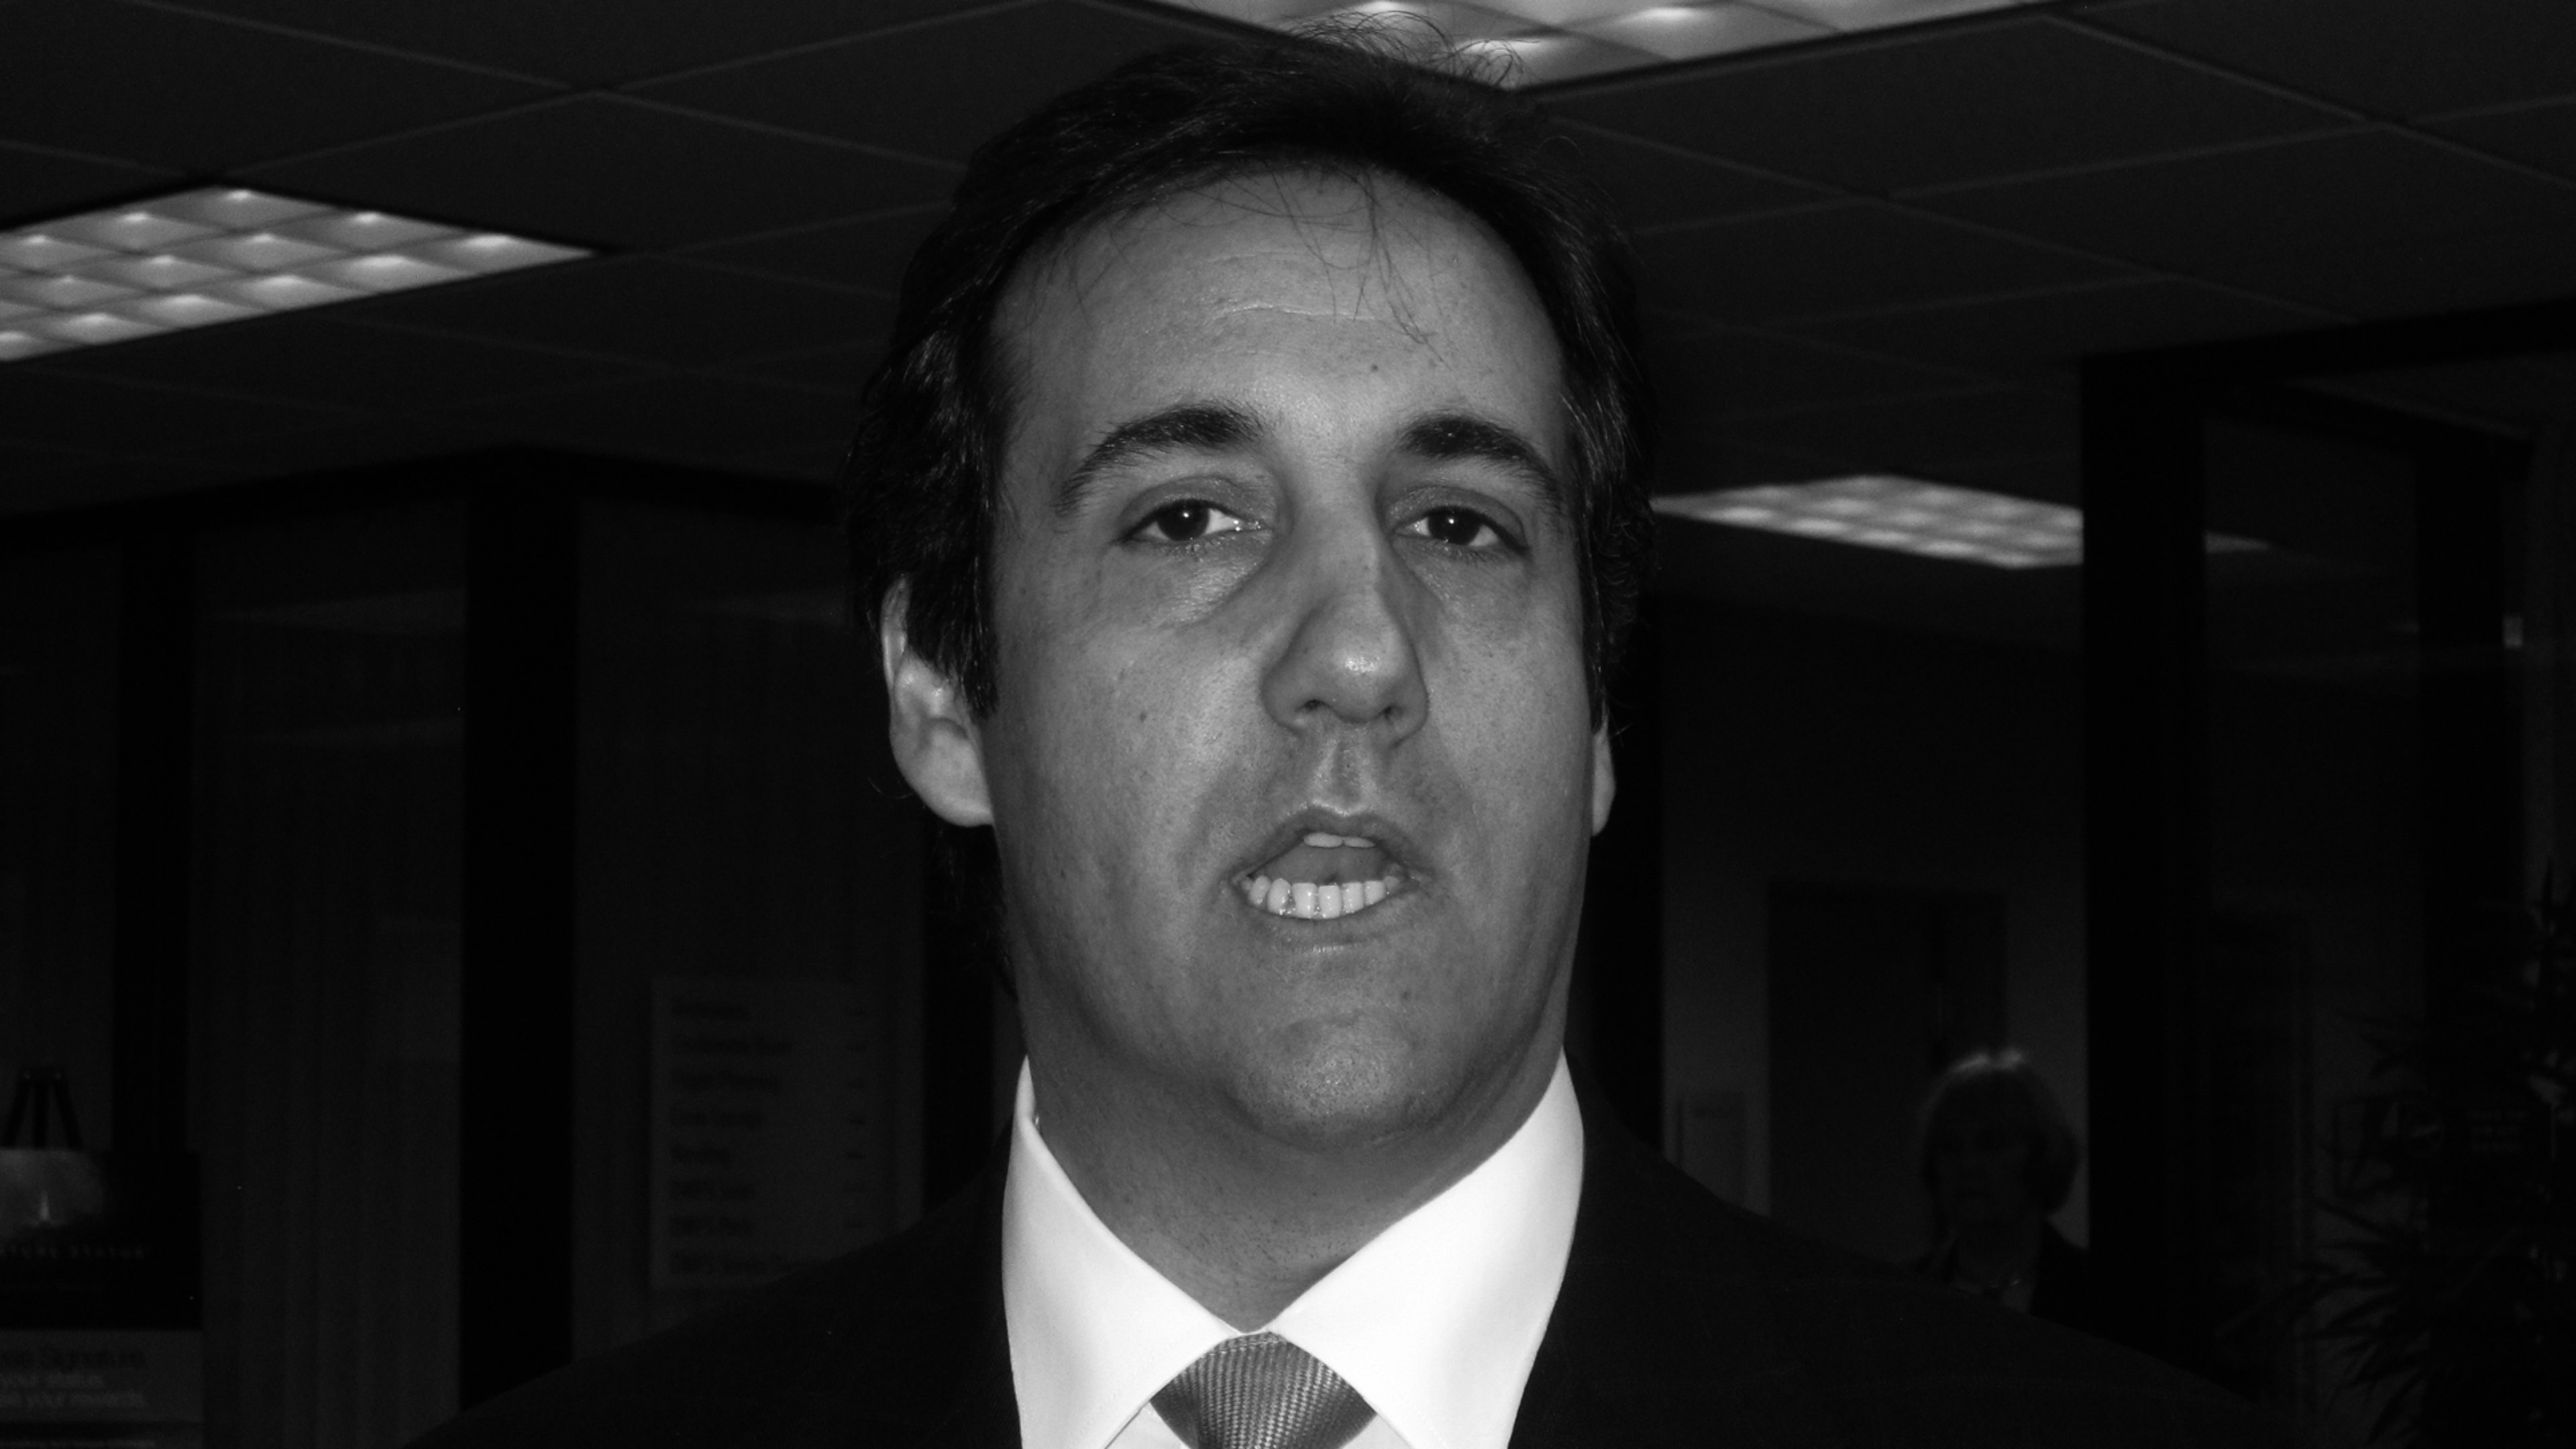 Michael Cohen just set up a GoFundMe page to help pay his legal costs